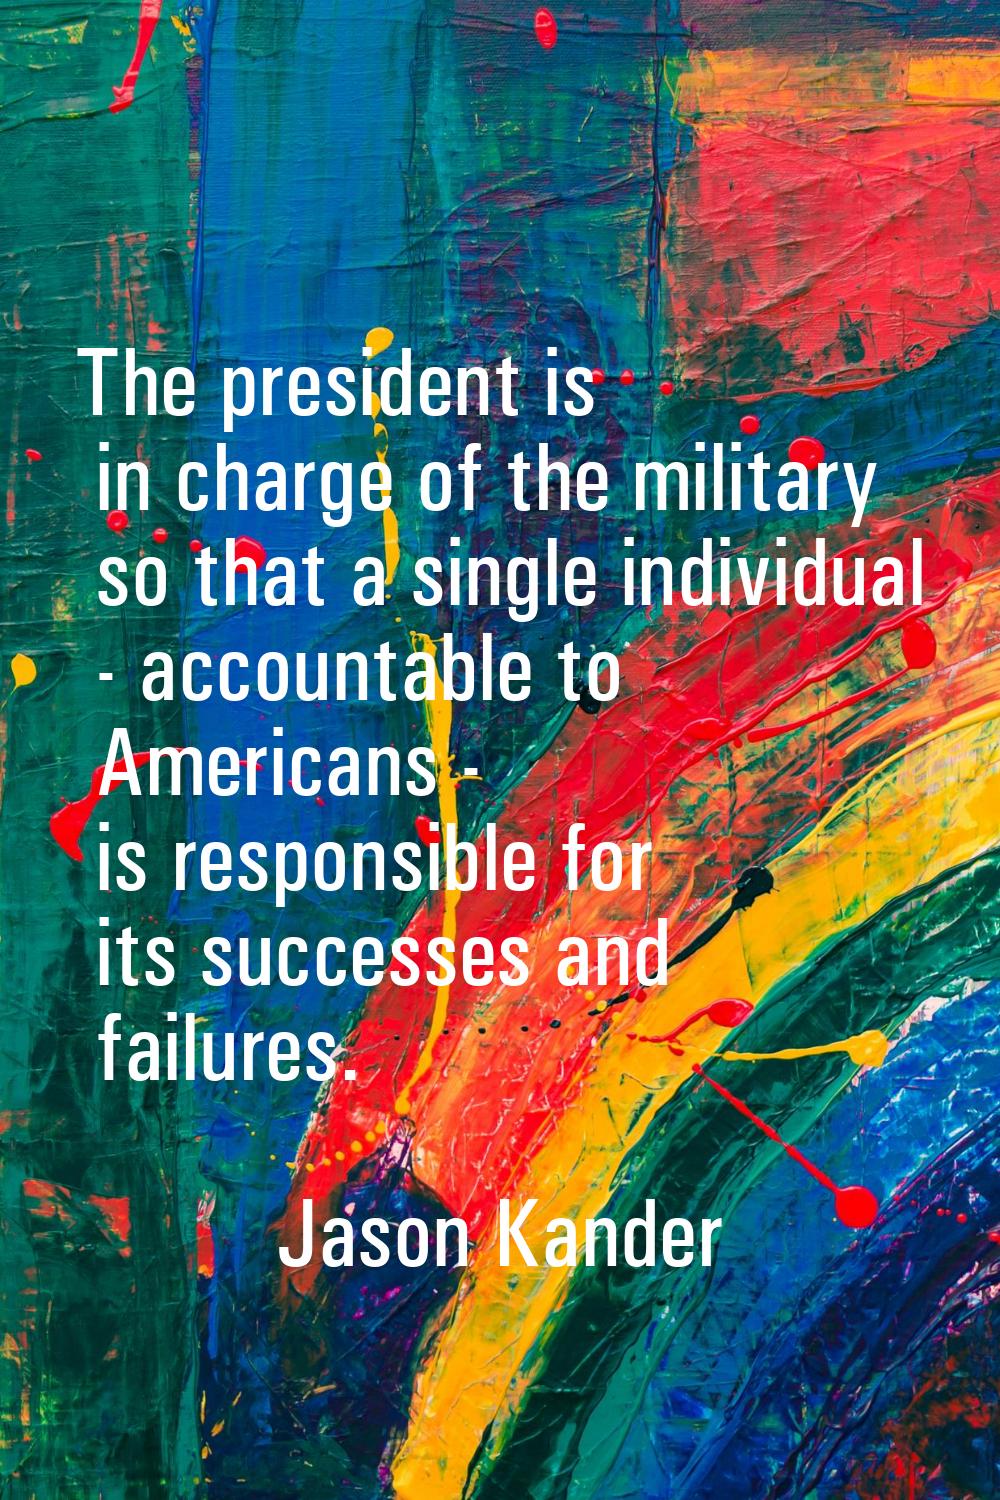 The president is in charge of the military so that a single individual - accountable to Americans -